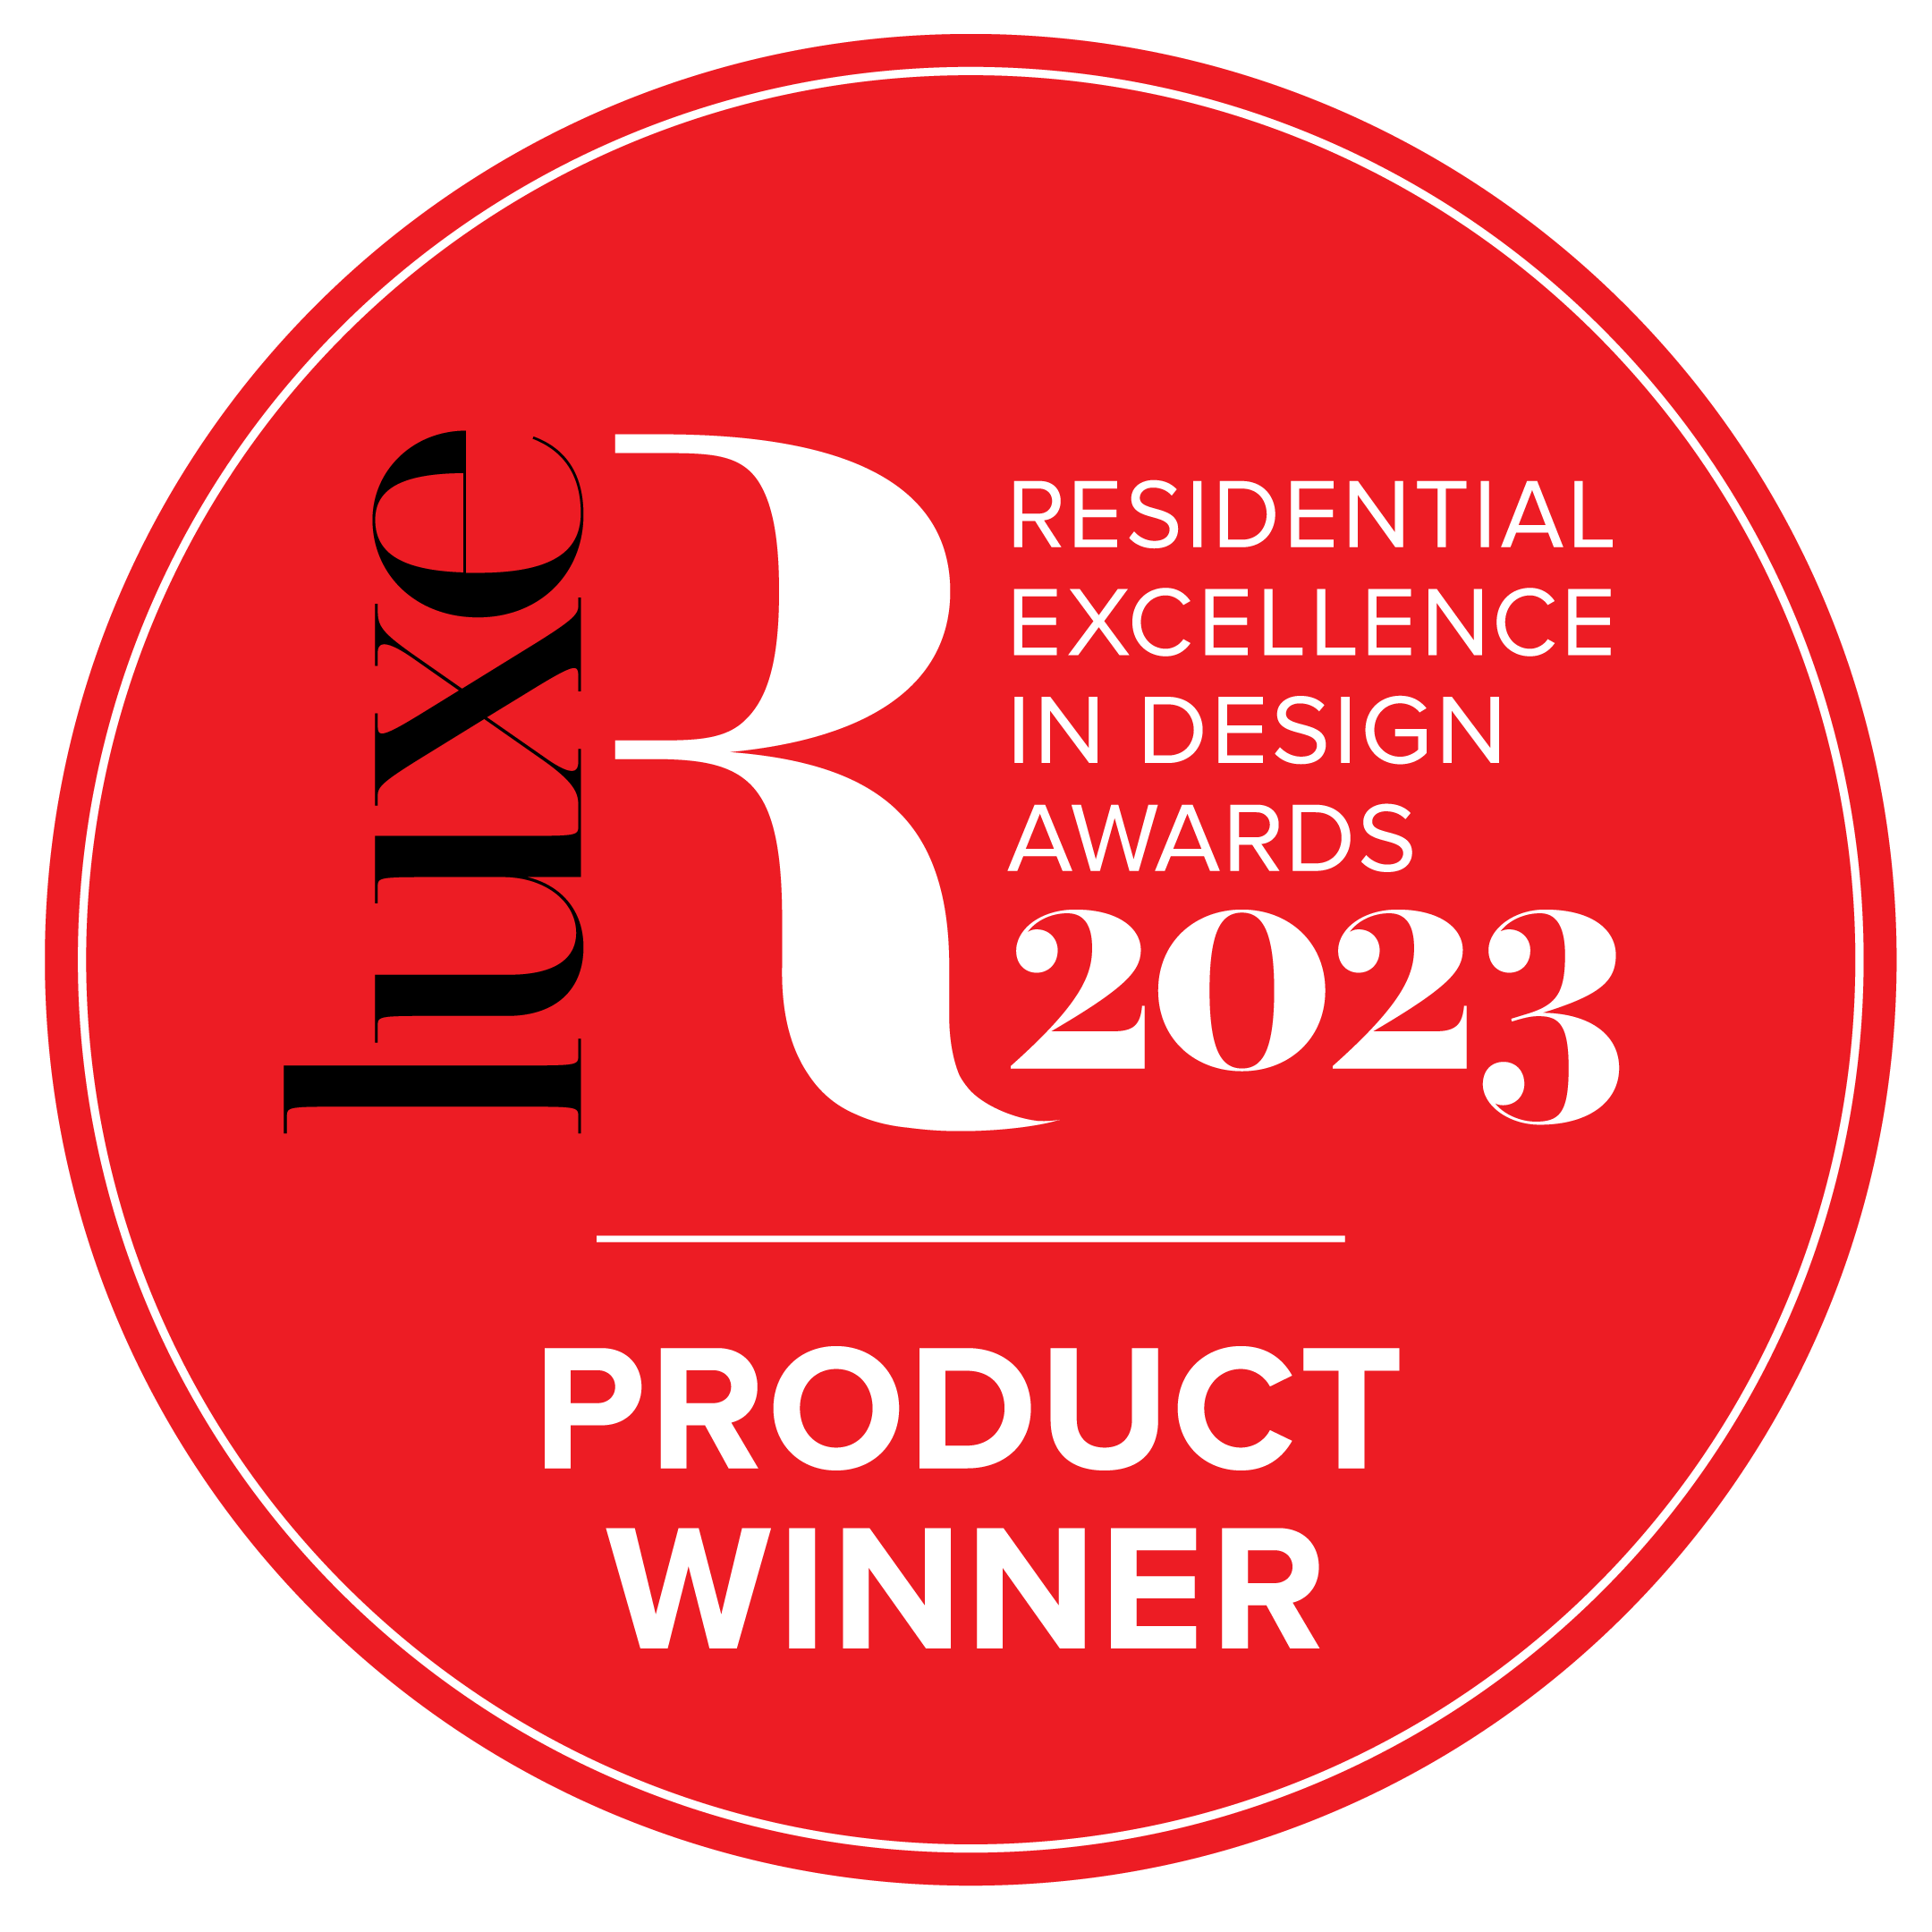 RED Awards Product Winner